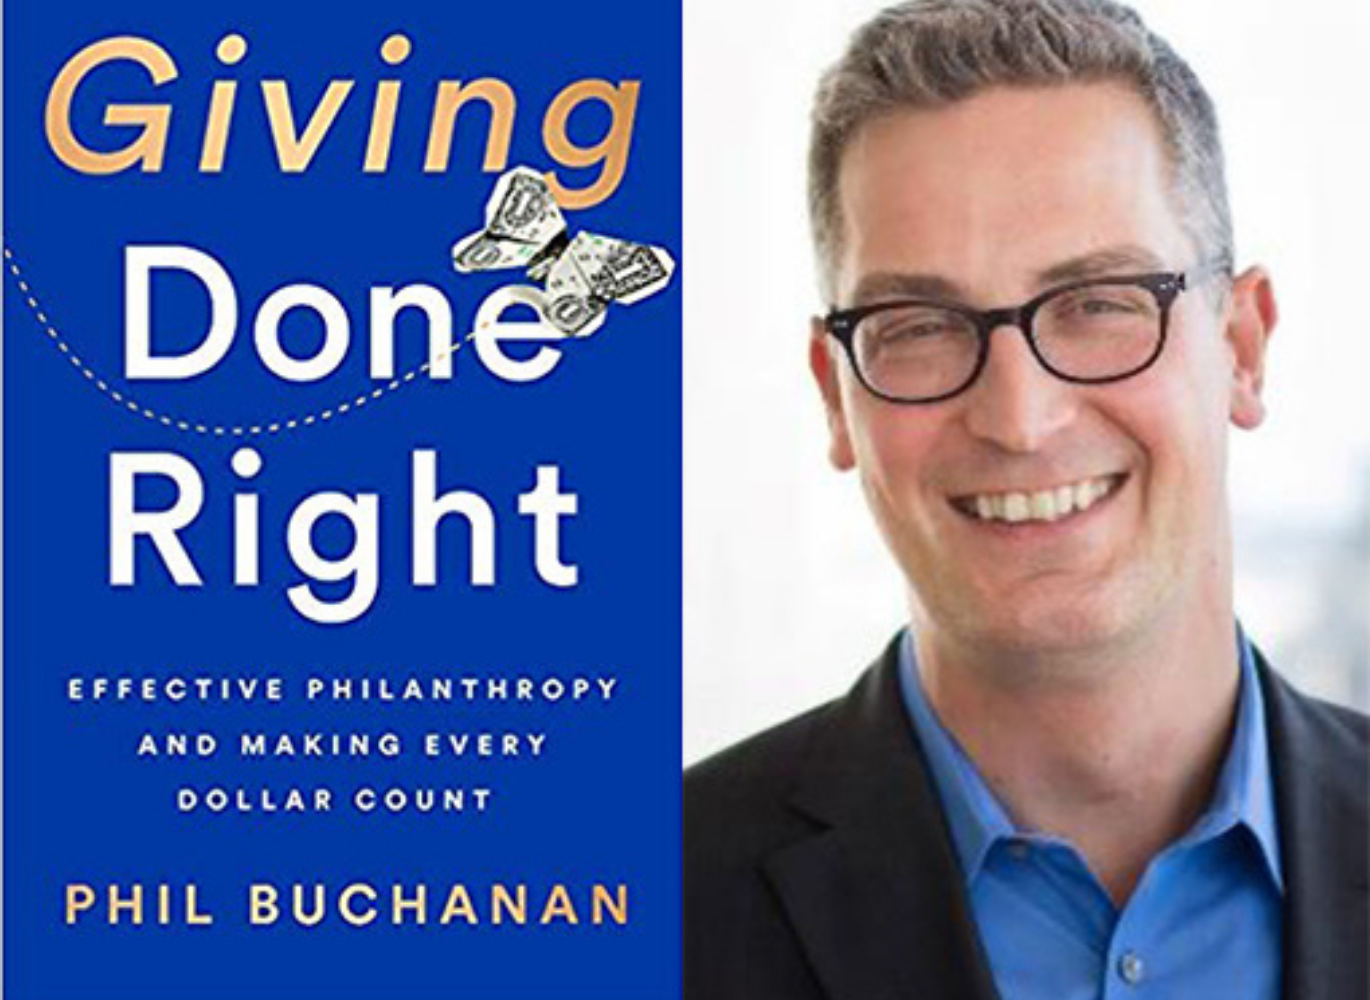 Photo of Phil Buchanan showcasing his "Giving Done Right" event